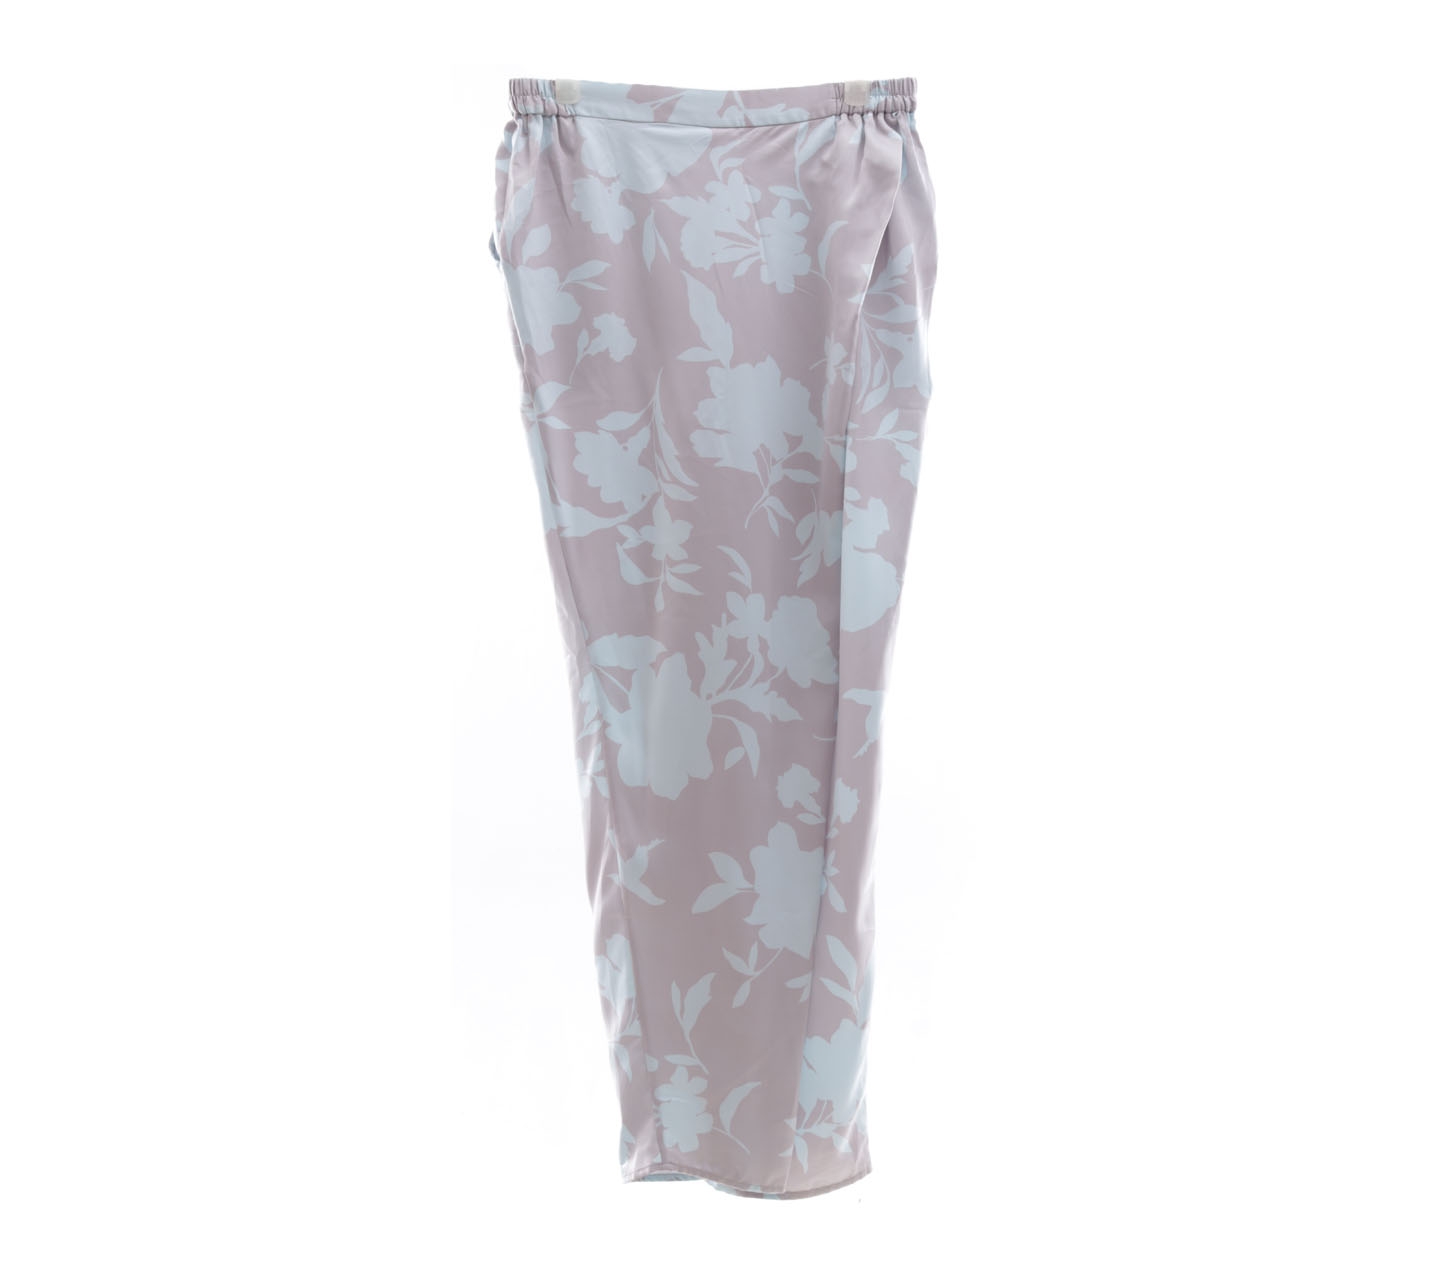 Riamiranda Taupe & Blue Printed Floral Trousers